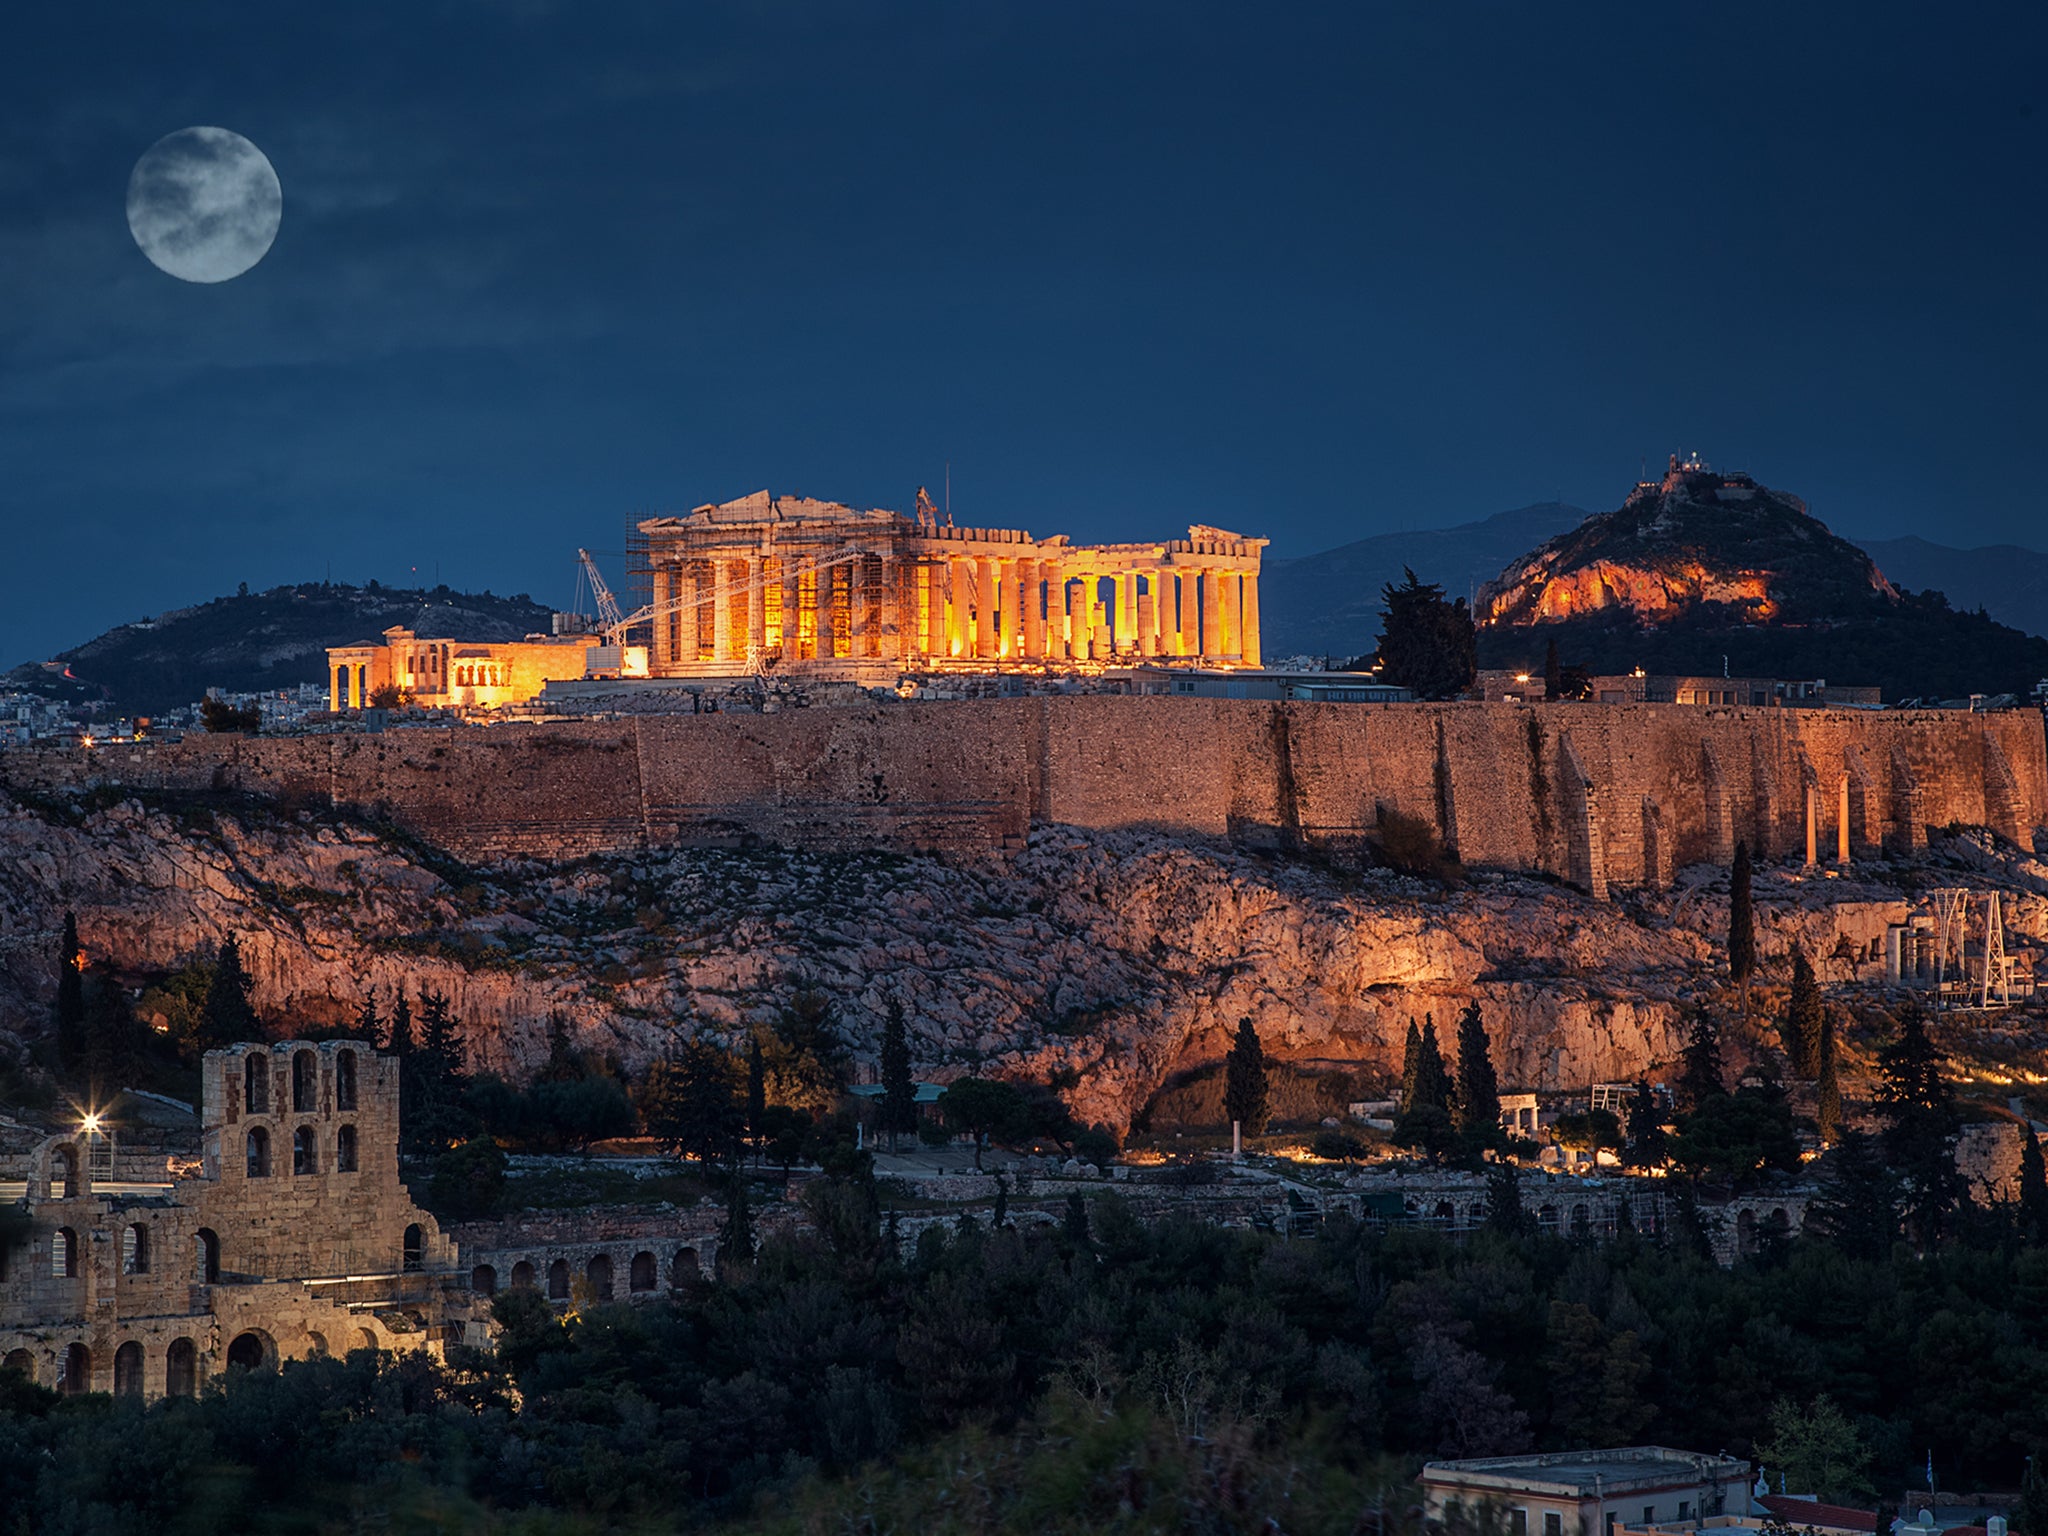 The Parthenon lit up at night is a spectacular sight